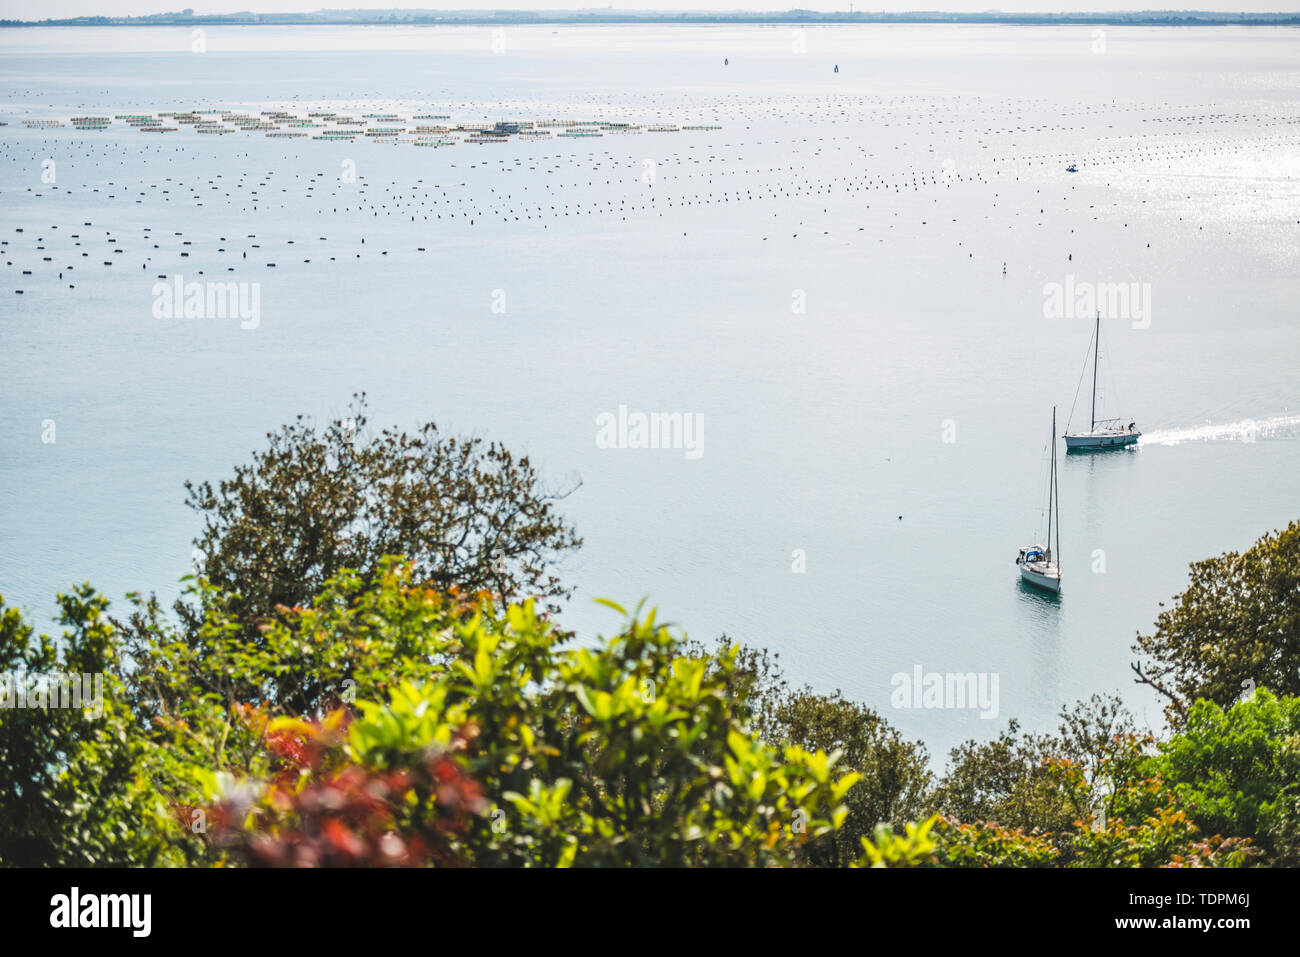 Oyster fishing in the Adriatic Sea; Italy Stock Photo